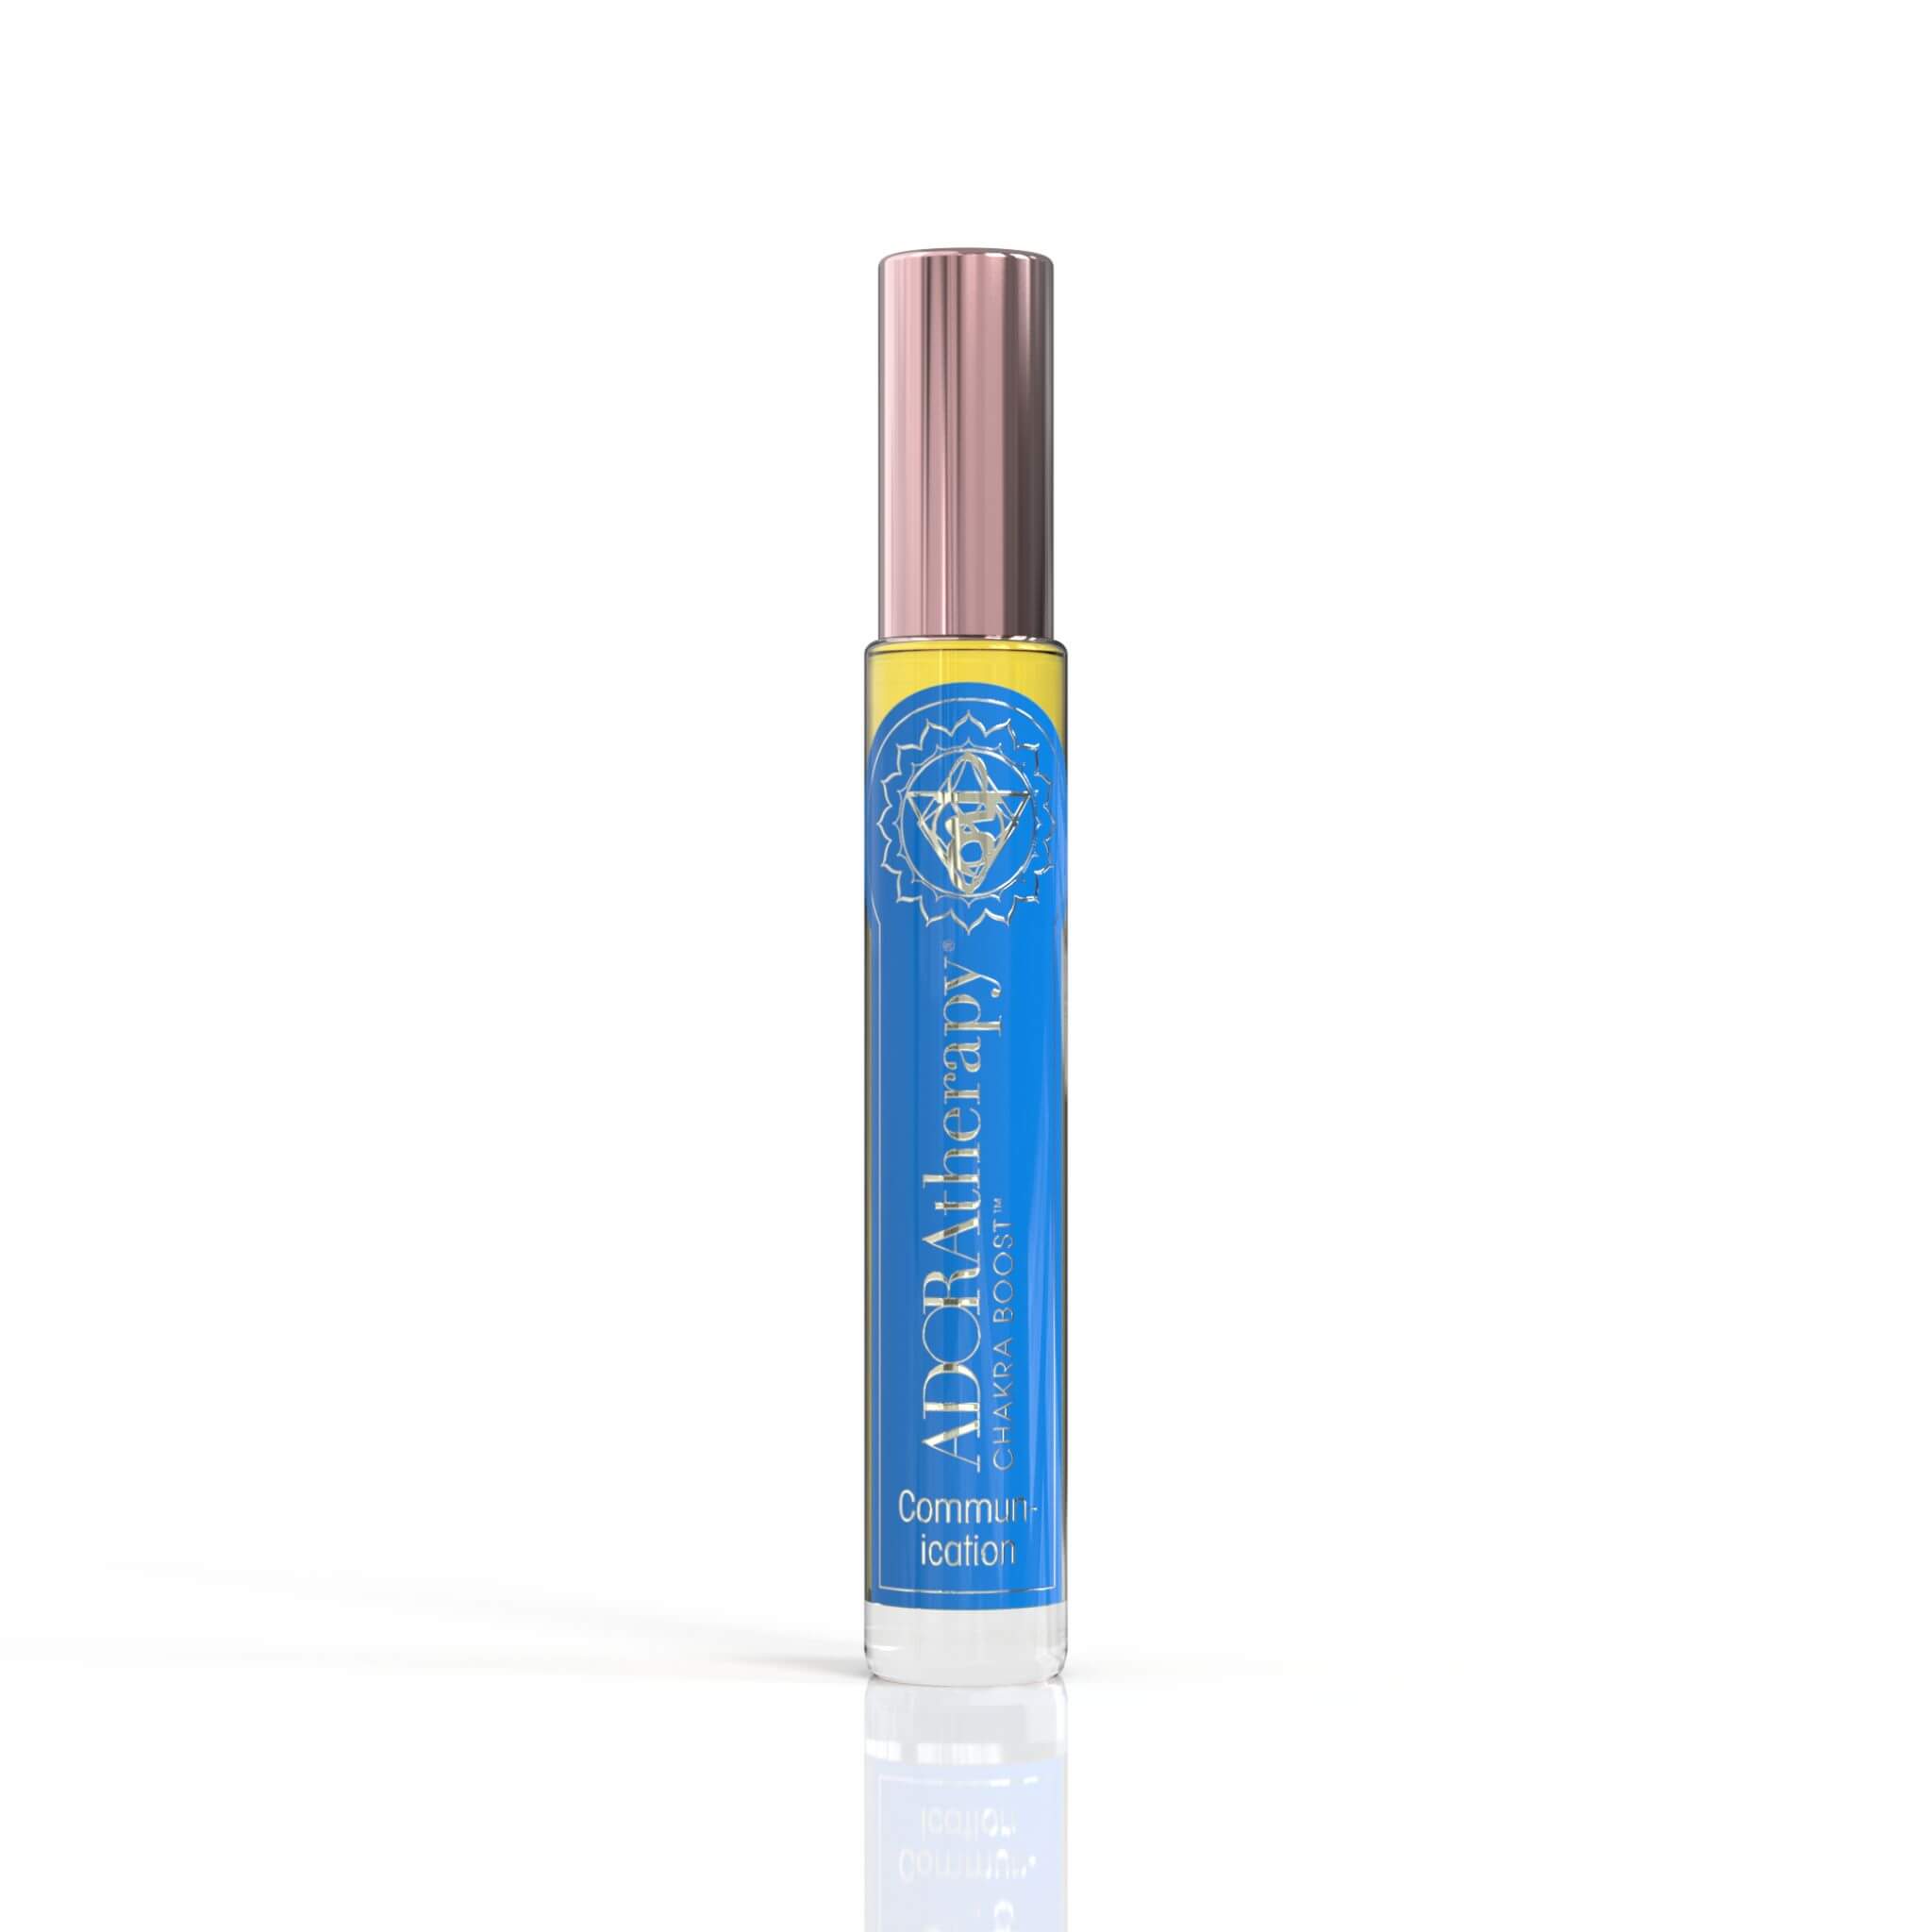 Chakra 5 Communication Roll On Perfume Oil by ADORAtherapy